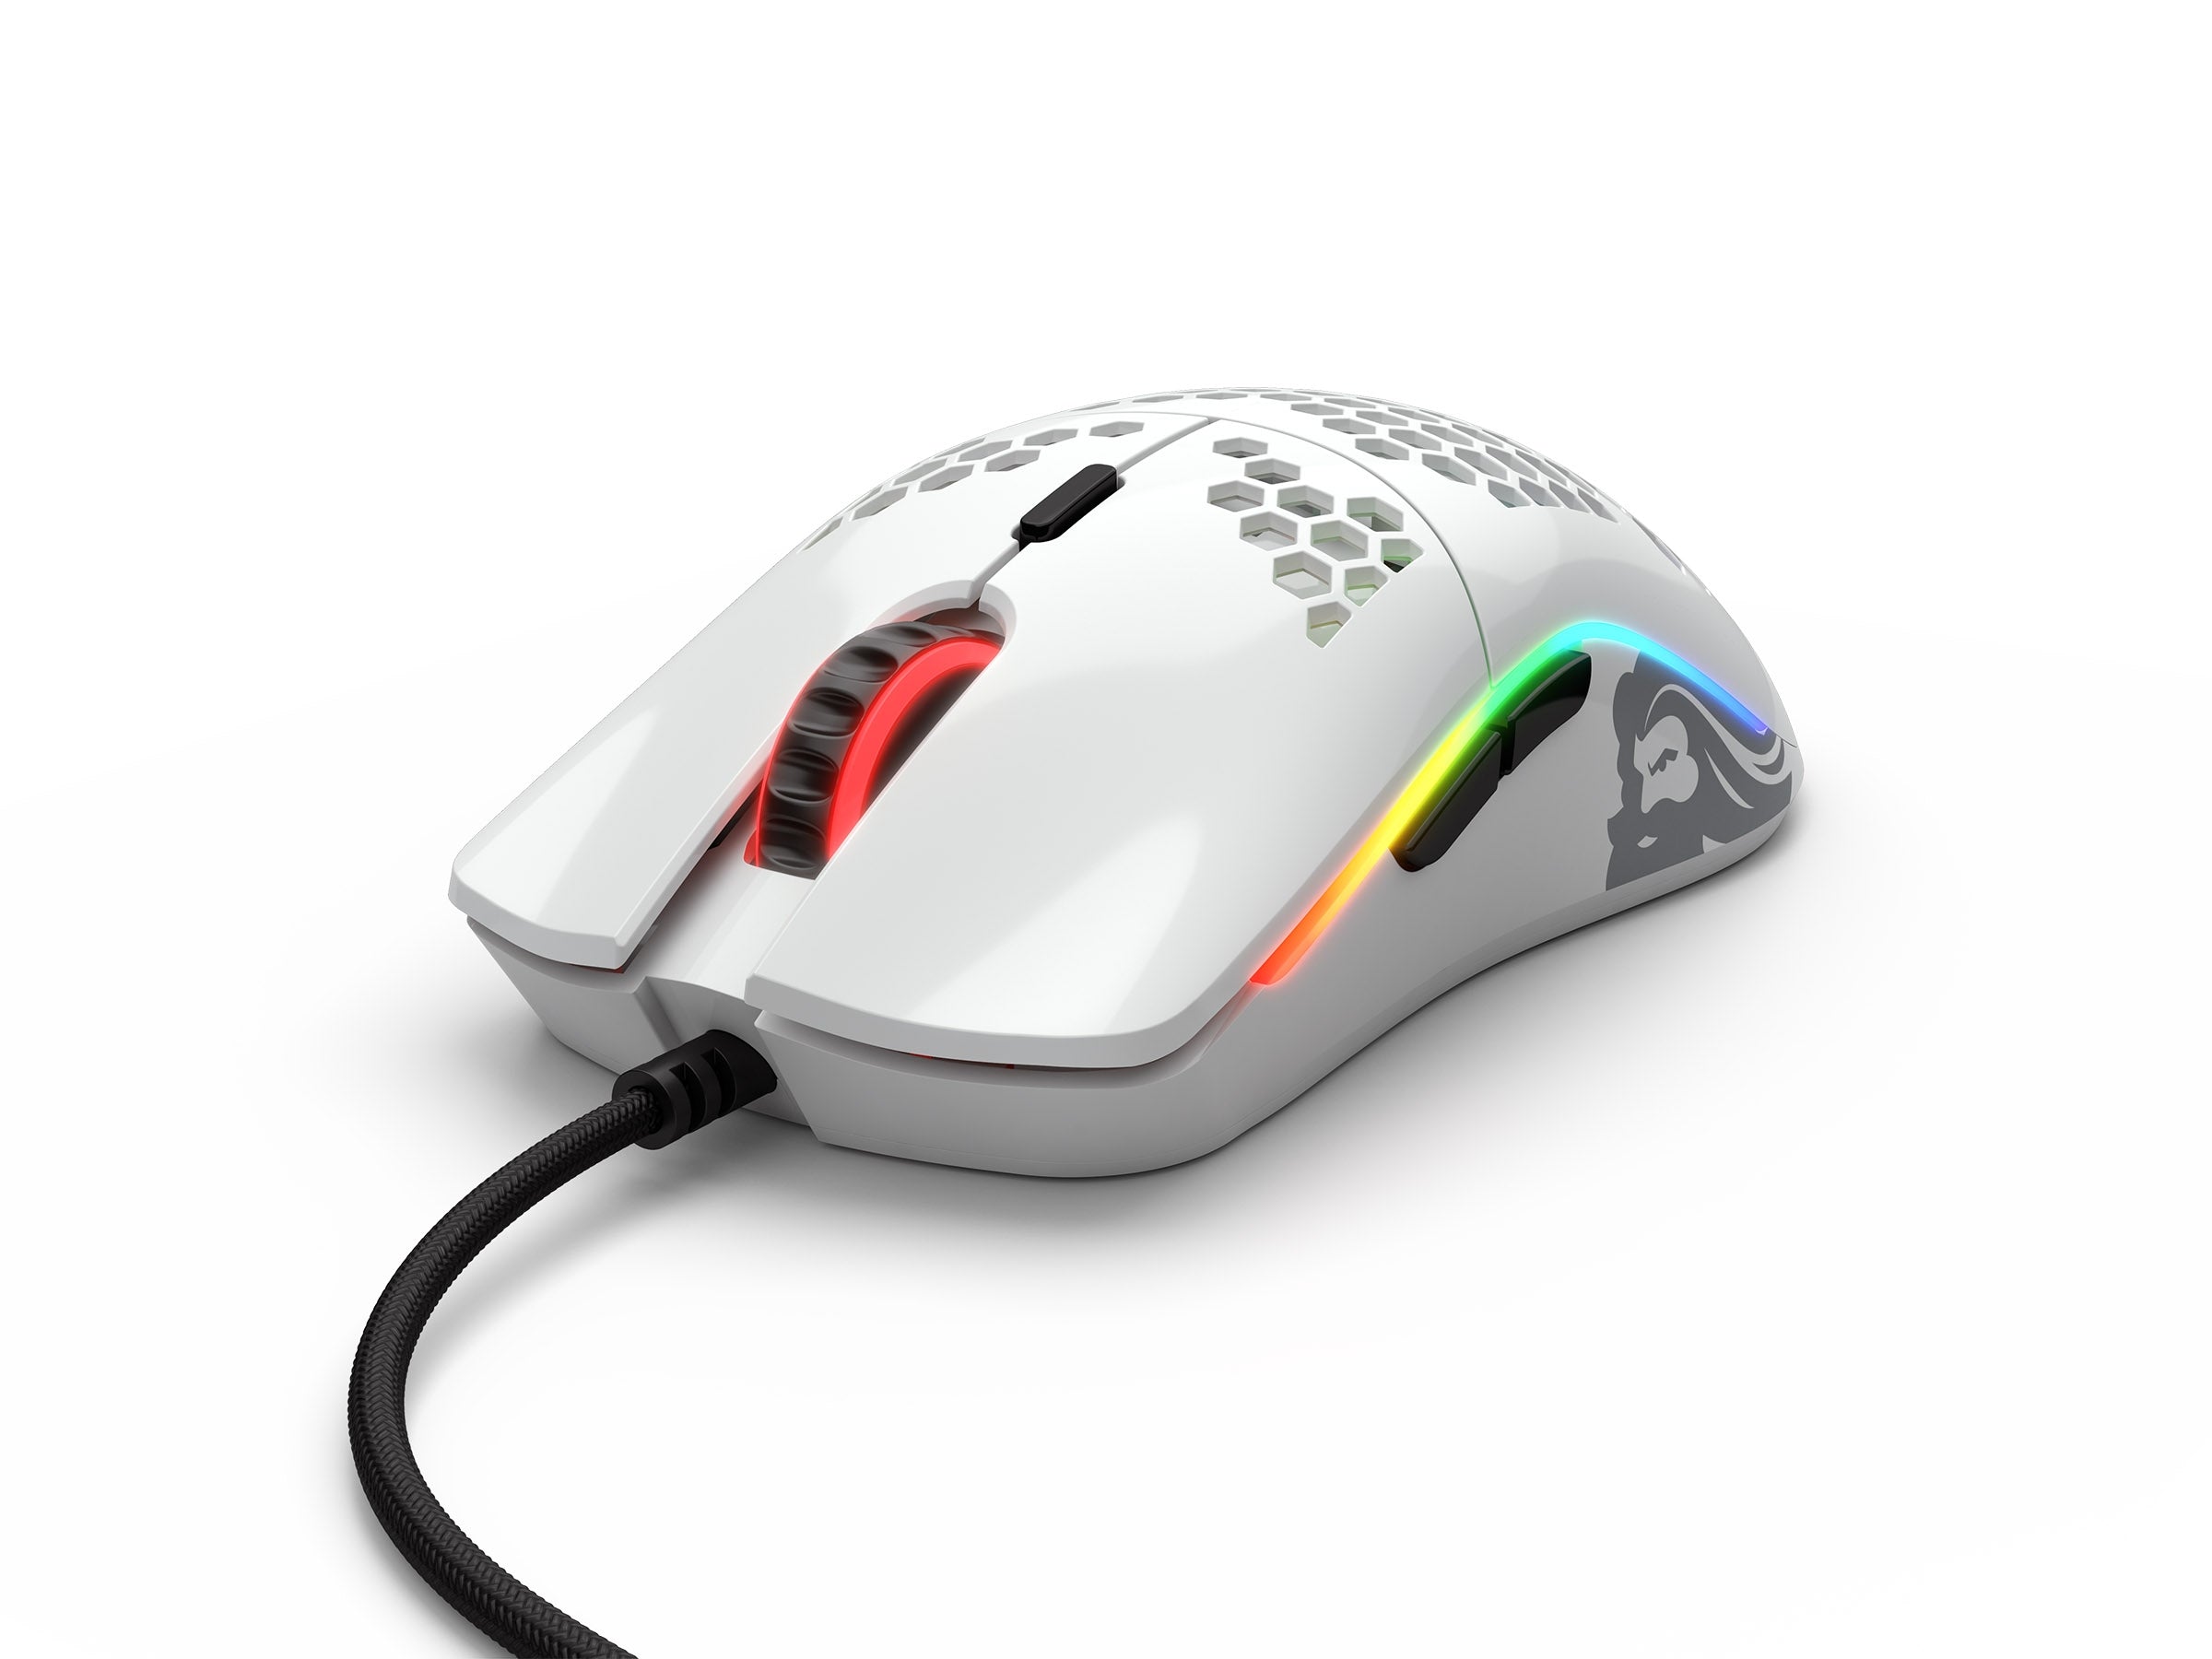 Glorious PC Model O Minus Glossy White Lightweight Gaming Mouse MKJRSNI0T6 |27499|